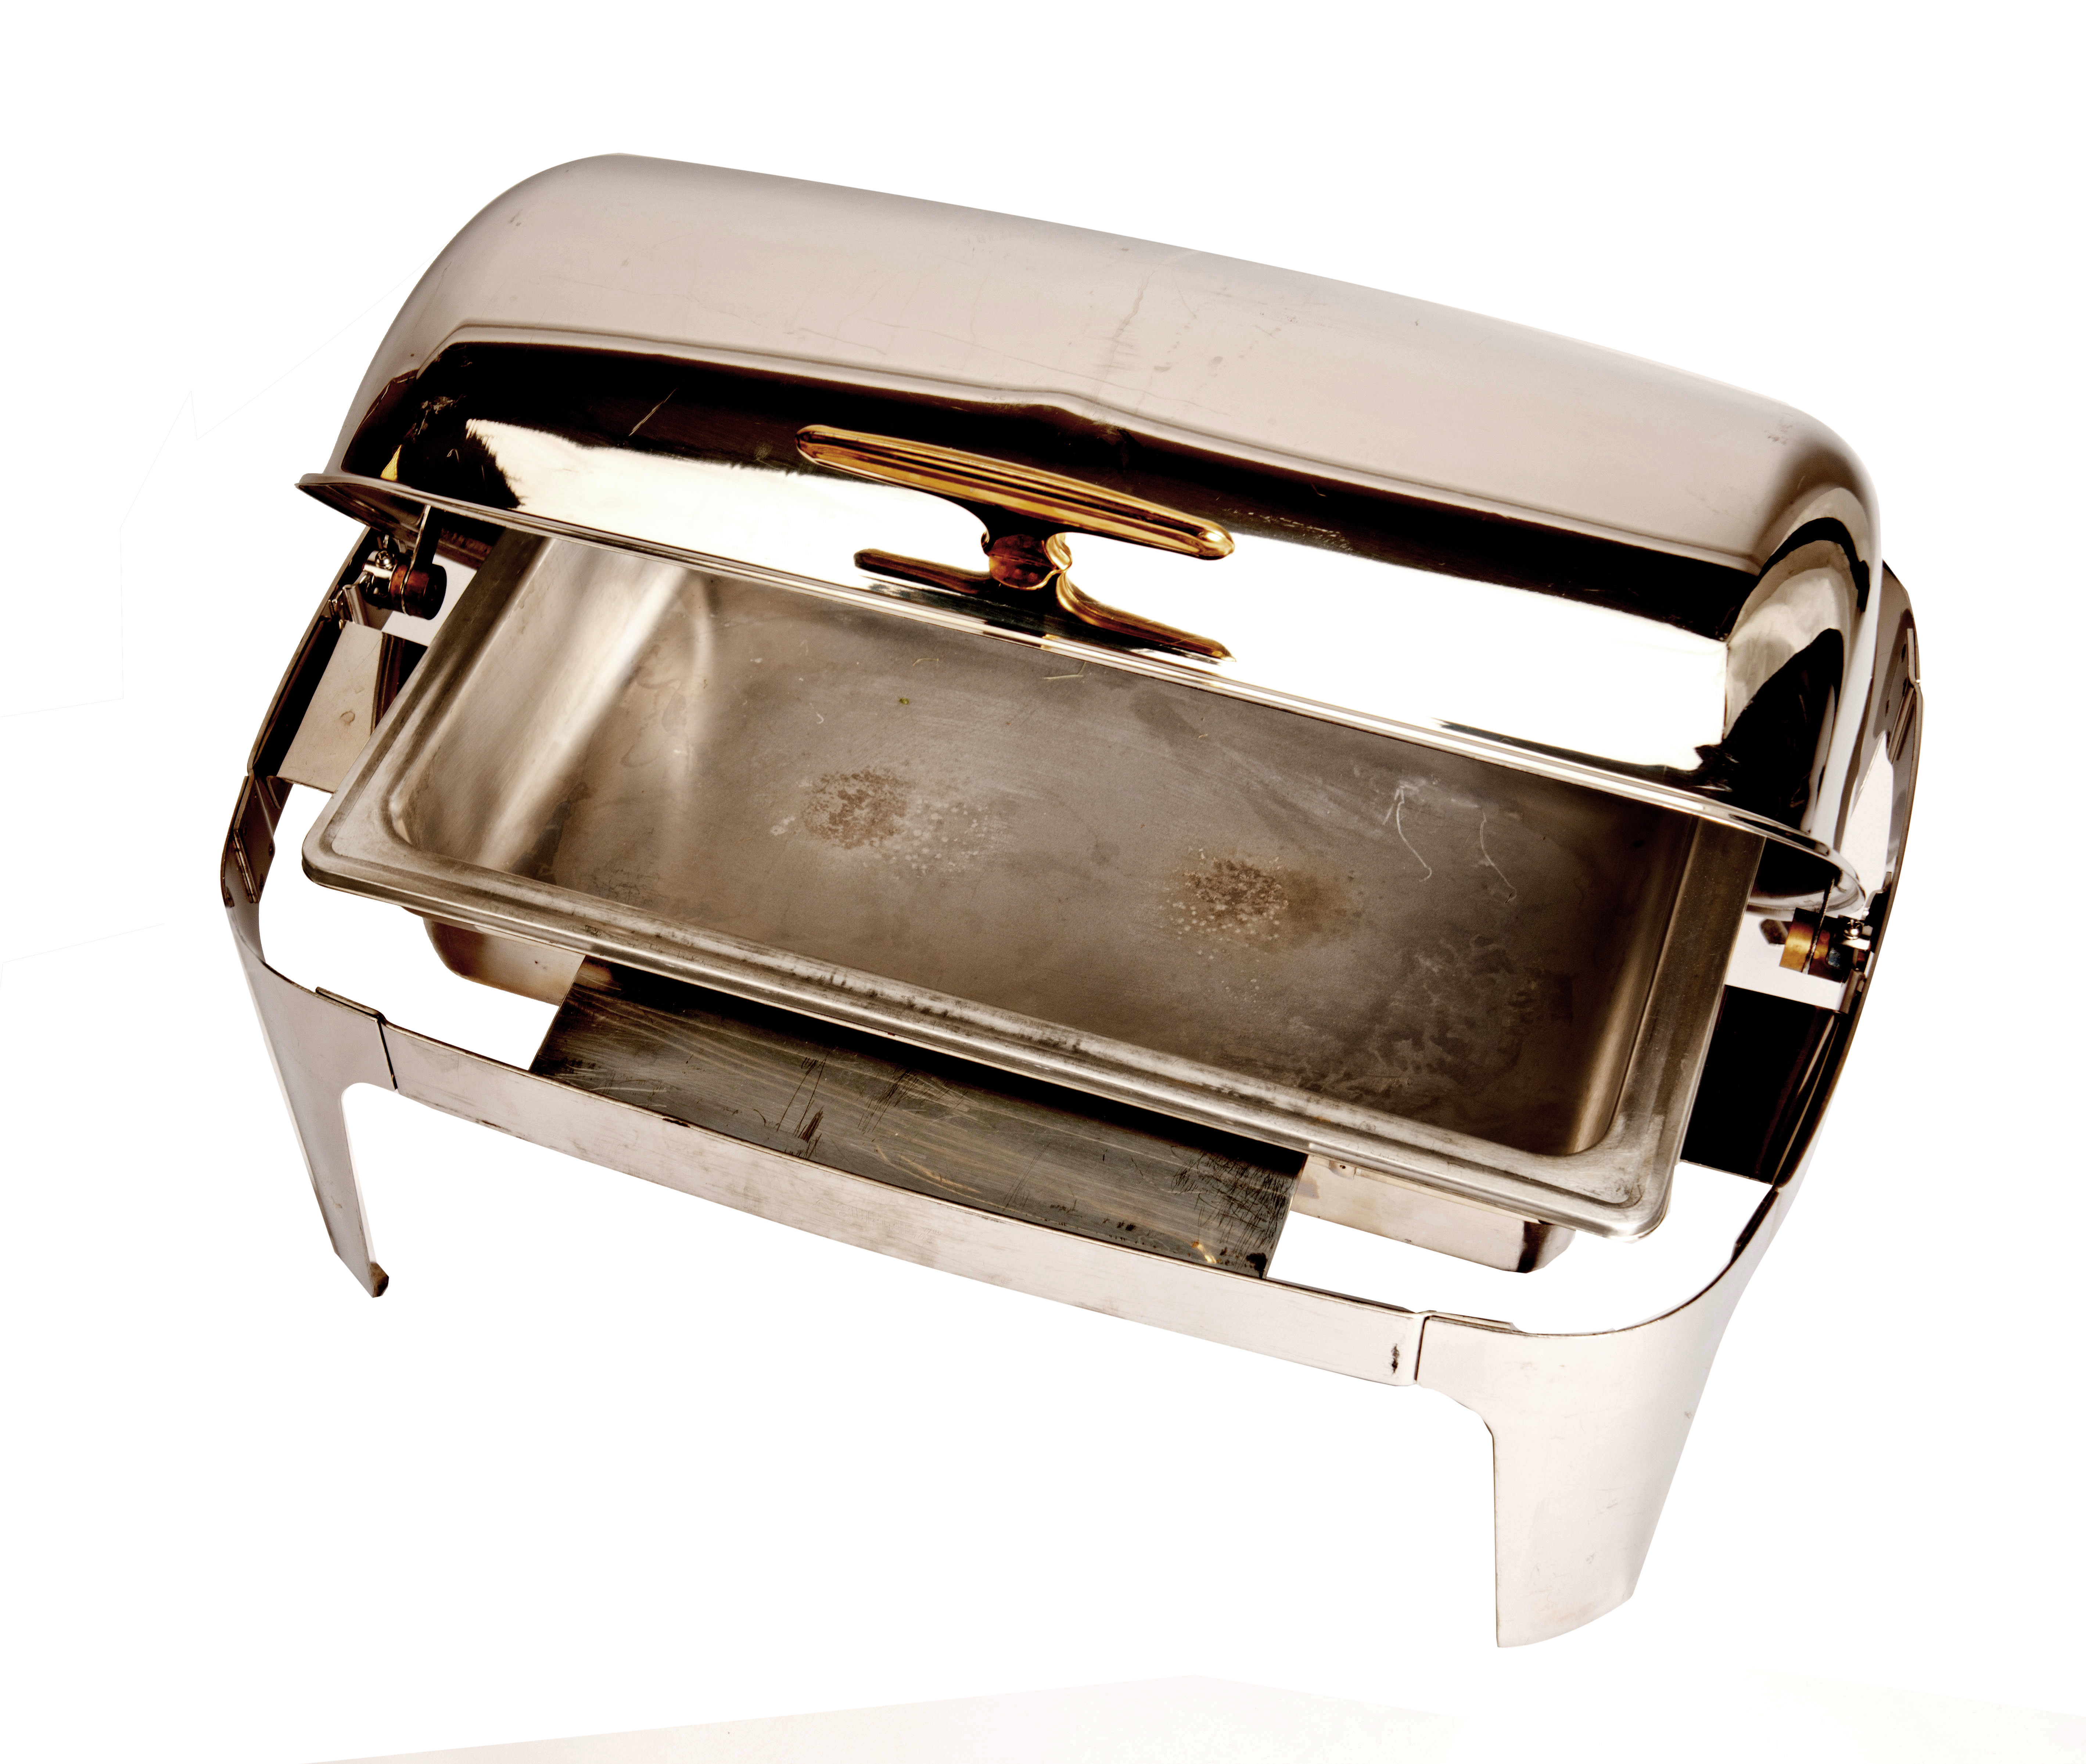 category_D1236 - Domed Chafing Dish 22